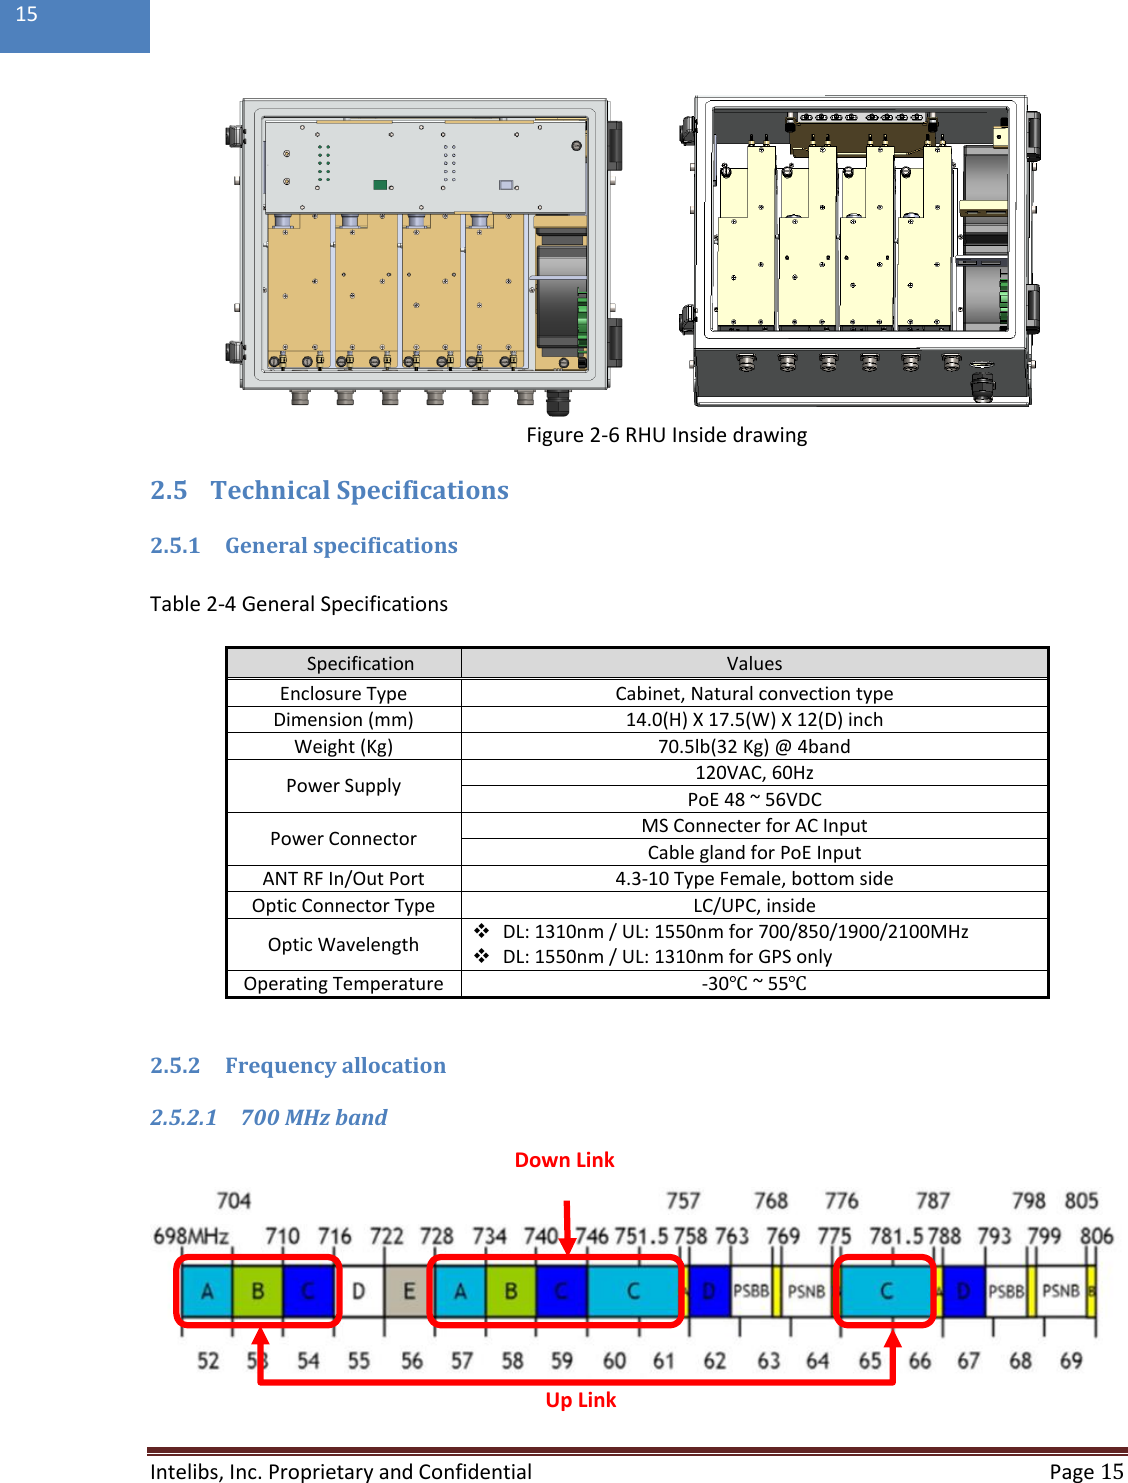  Intelibs, Inc. Proprietary and Confidential   Page 15  15            Figure 2-6 RHU Inside drawing 2.5 Technical Specifications 2.5.1 General specifications  Table 2-4 General Specifications  Specification Values Enclosure Type Cabinet, Natural convection type Dimension (mm) 14.0(H) X 17.5(W) X 12(D) inch Weight (Kg) 70.5lb(32 Kg) @ 4band Power Supply 120VAC, 60Hz PoE 48 ~ 56VDC Power Connector MS Connecter for AC Input Cable gland for PoE Input ANT RF In/Out Port 4.3-10 Type Female, bottom side Optic Connector Type LC/UPC, inside Optic Wavelength  DL: 1310nm / UL: 1550nm for 700/850/1900/2100MHz   DL: 1550nm / UL: 1310nm for GPS only Operating Temperature -30℃ ~ 55℃  2.5.2 Frequency allocation 2.5.2.1 700 MHz band    Down Link Up Link 